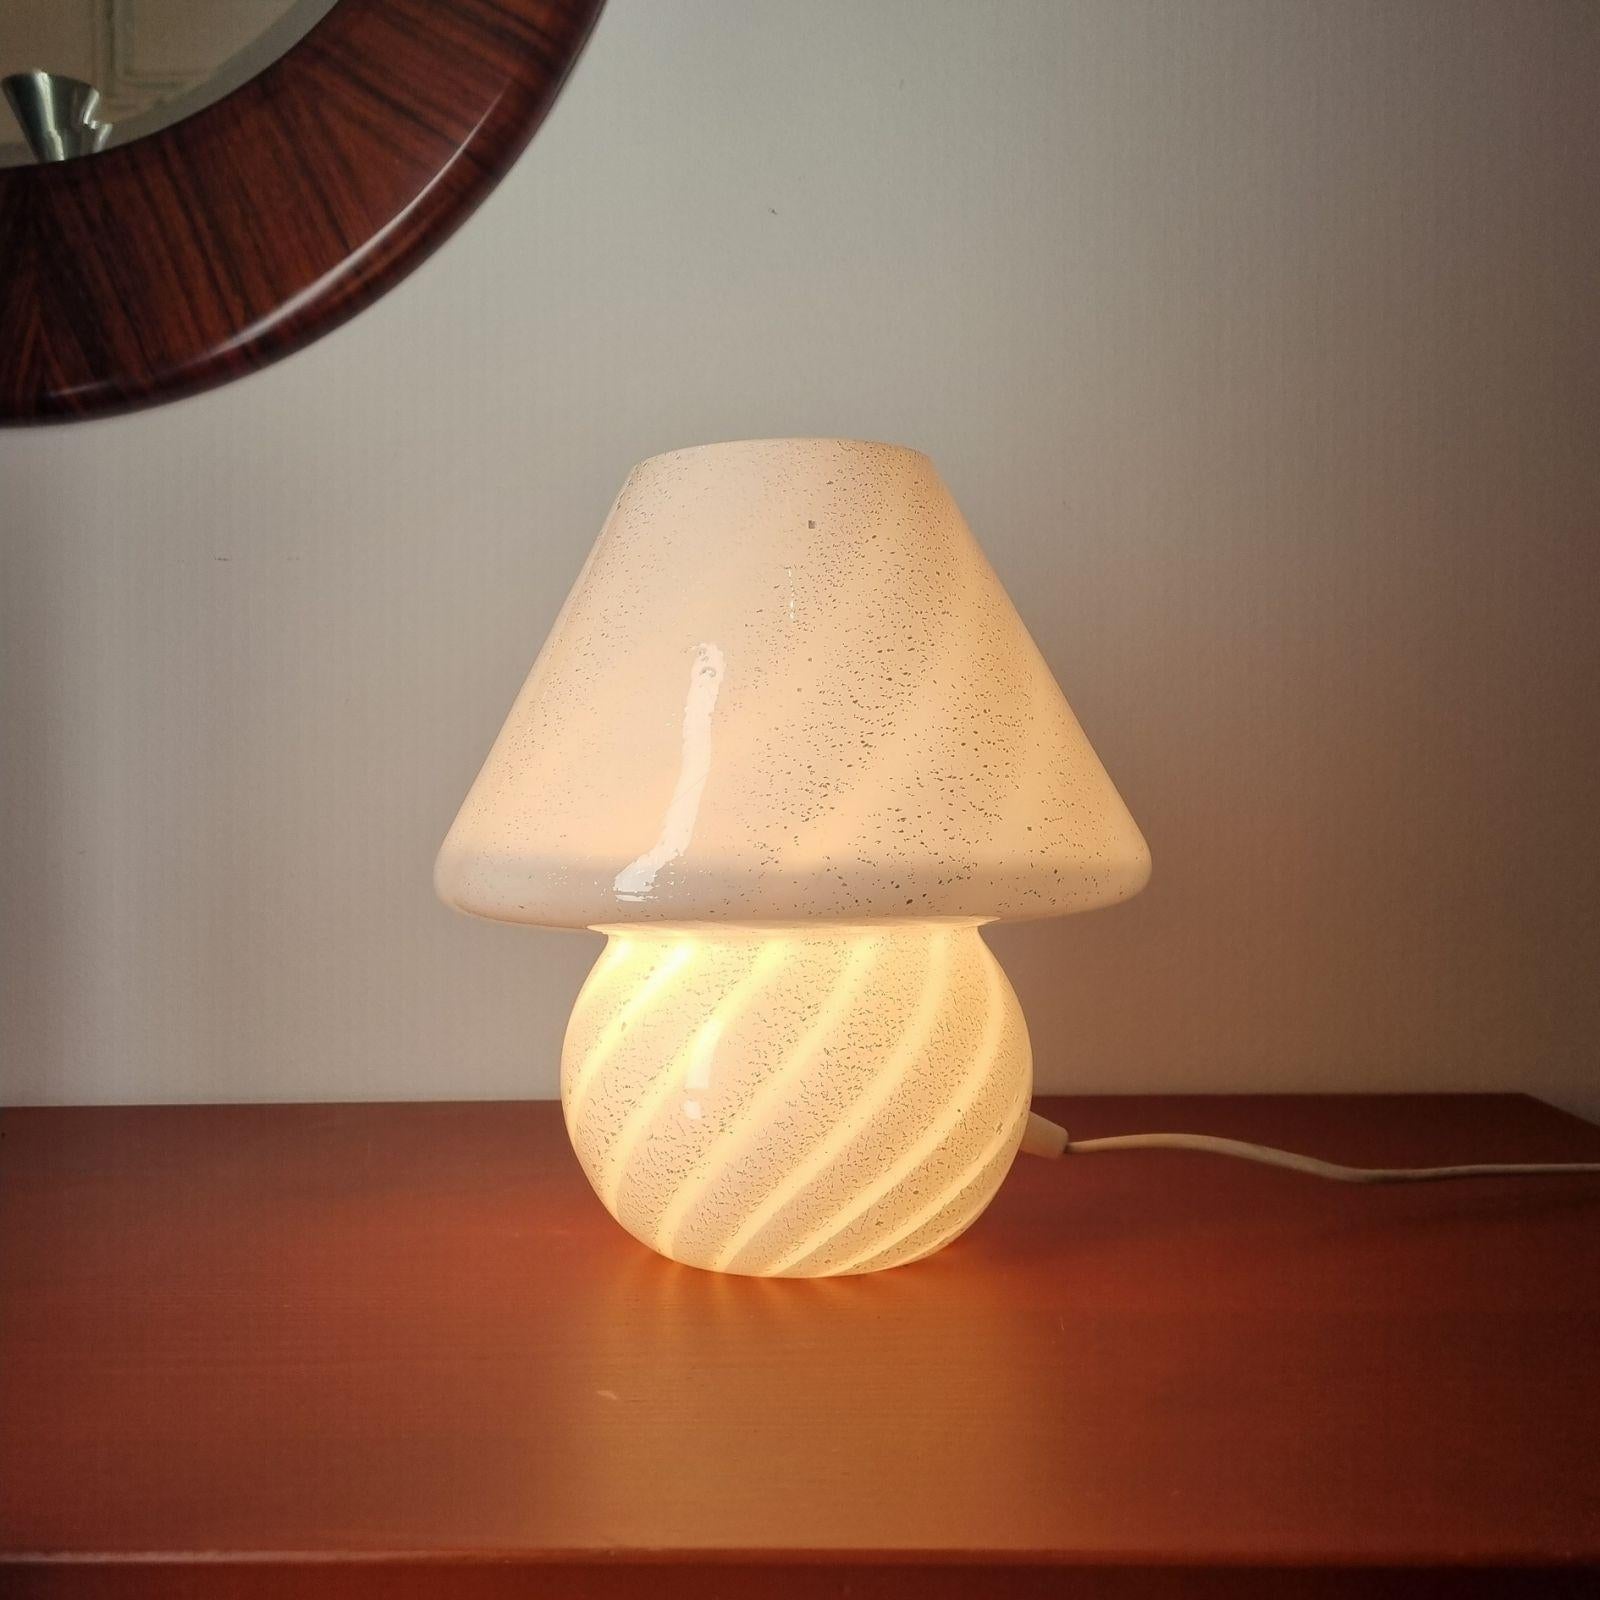 Italian modern white Murano glass Mushroom  table or night lamp. Made in Italy in the 70s.
In very good vintage condition, working perfectly.

Dimensions:
h 26cm
d 24cm